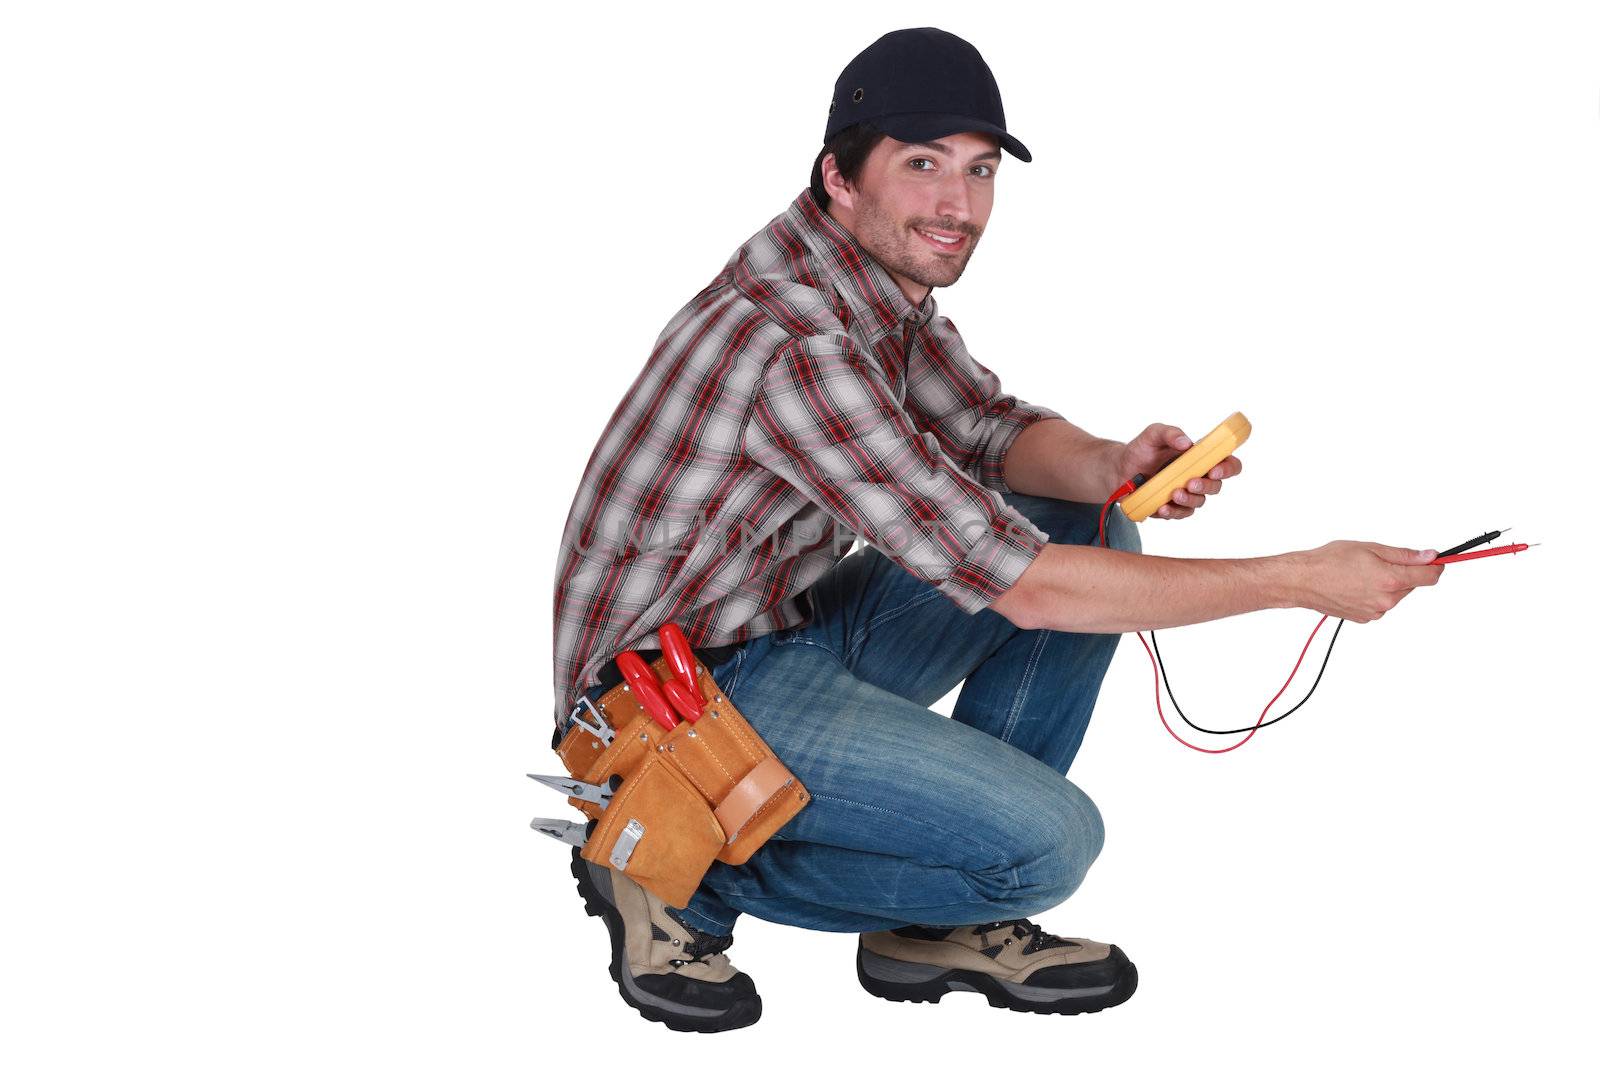 Electrician holding a tool by phovoir